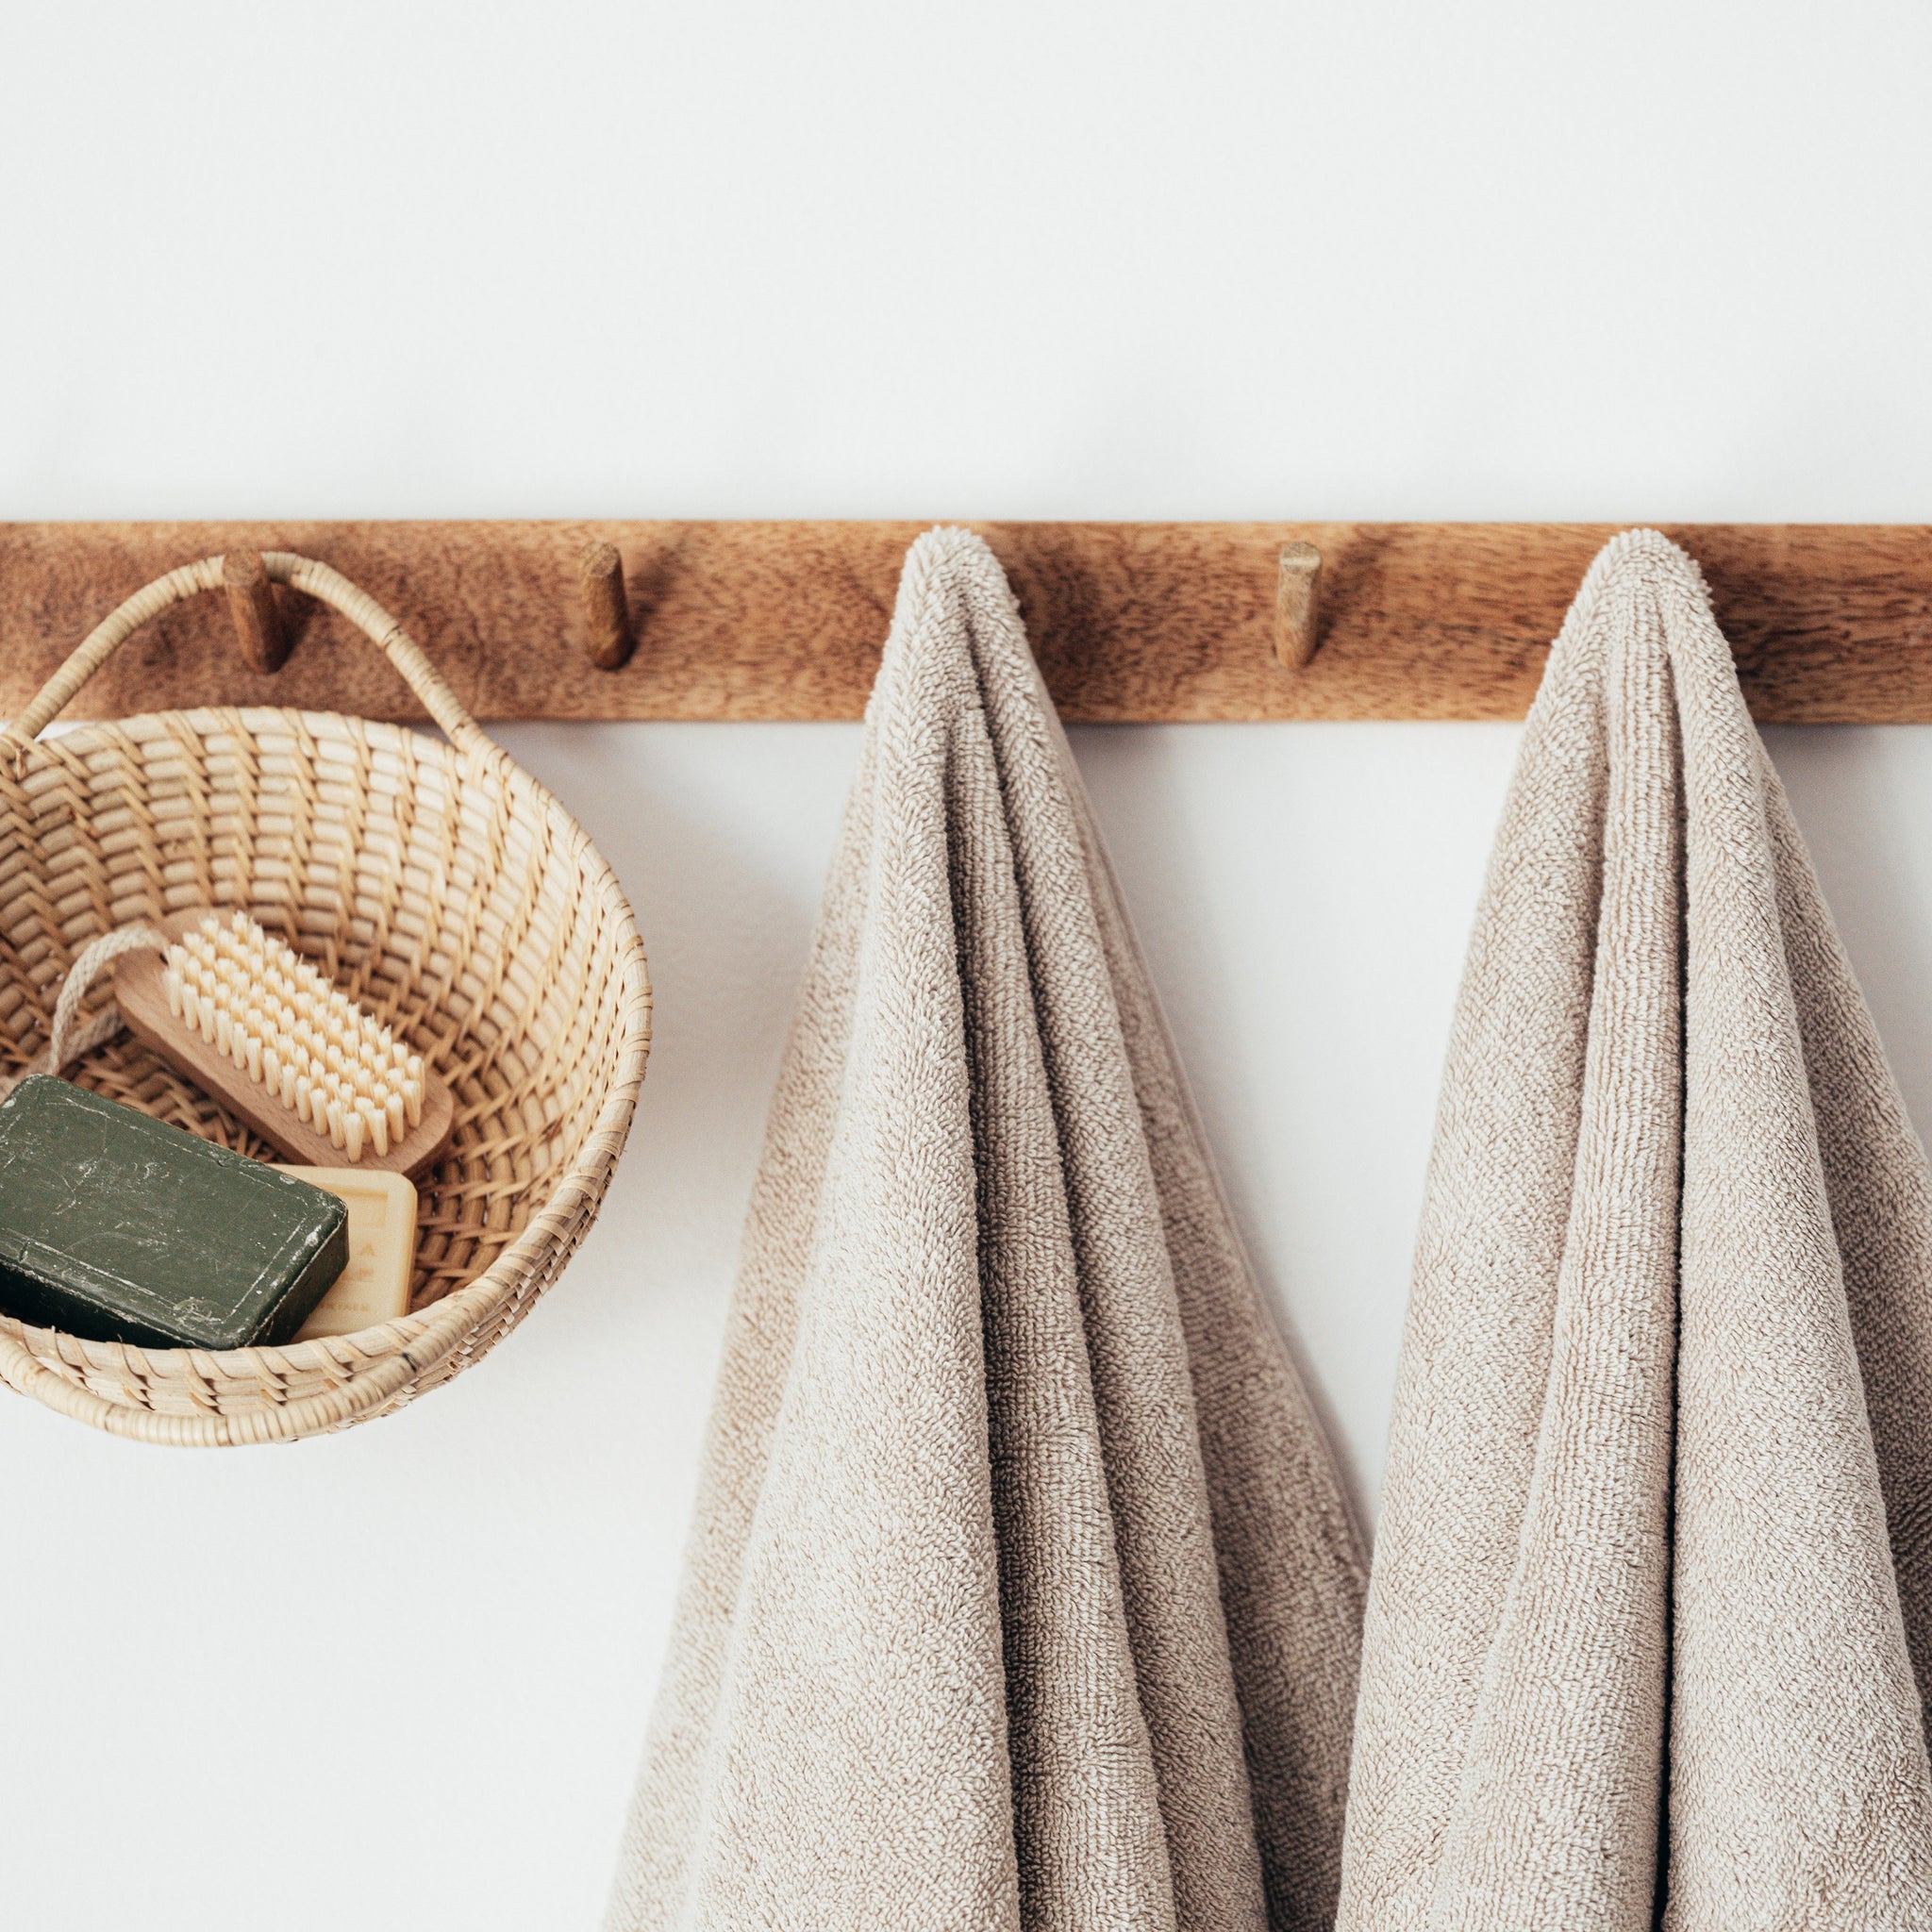 How to Wash Linen Napkins: A Simple Guide for Fresh and Crisp Elegance